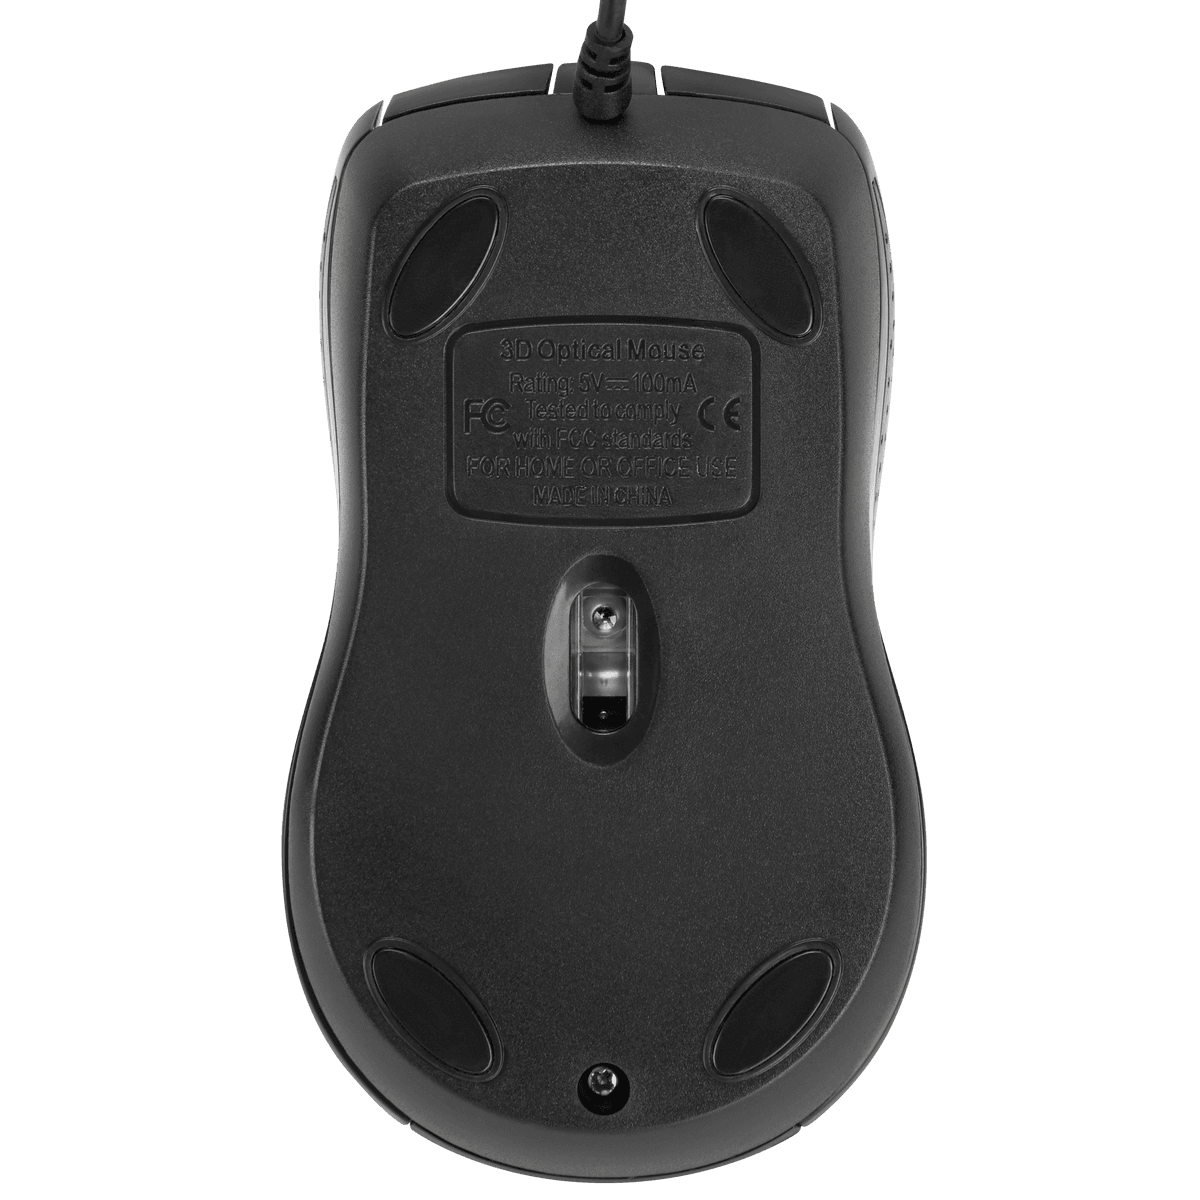 Optical Mouse Tested To Comply With Fcc Standards Driver